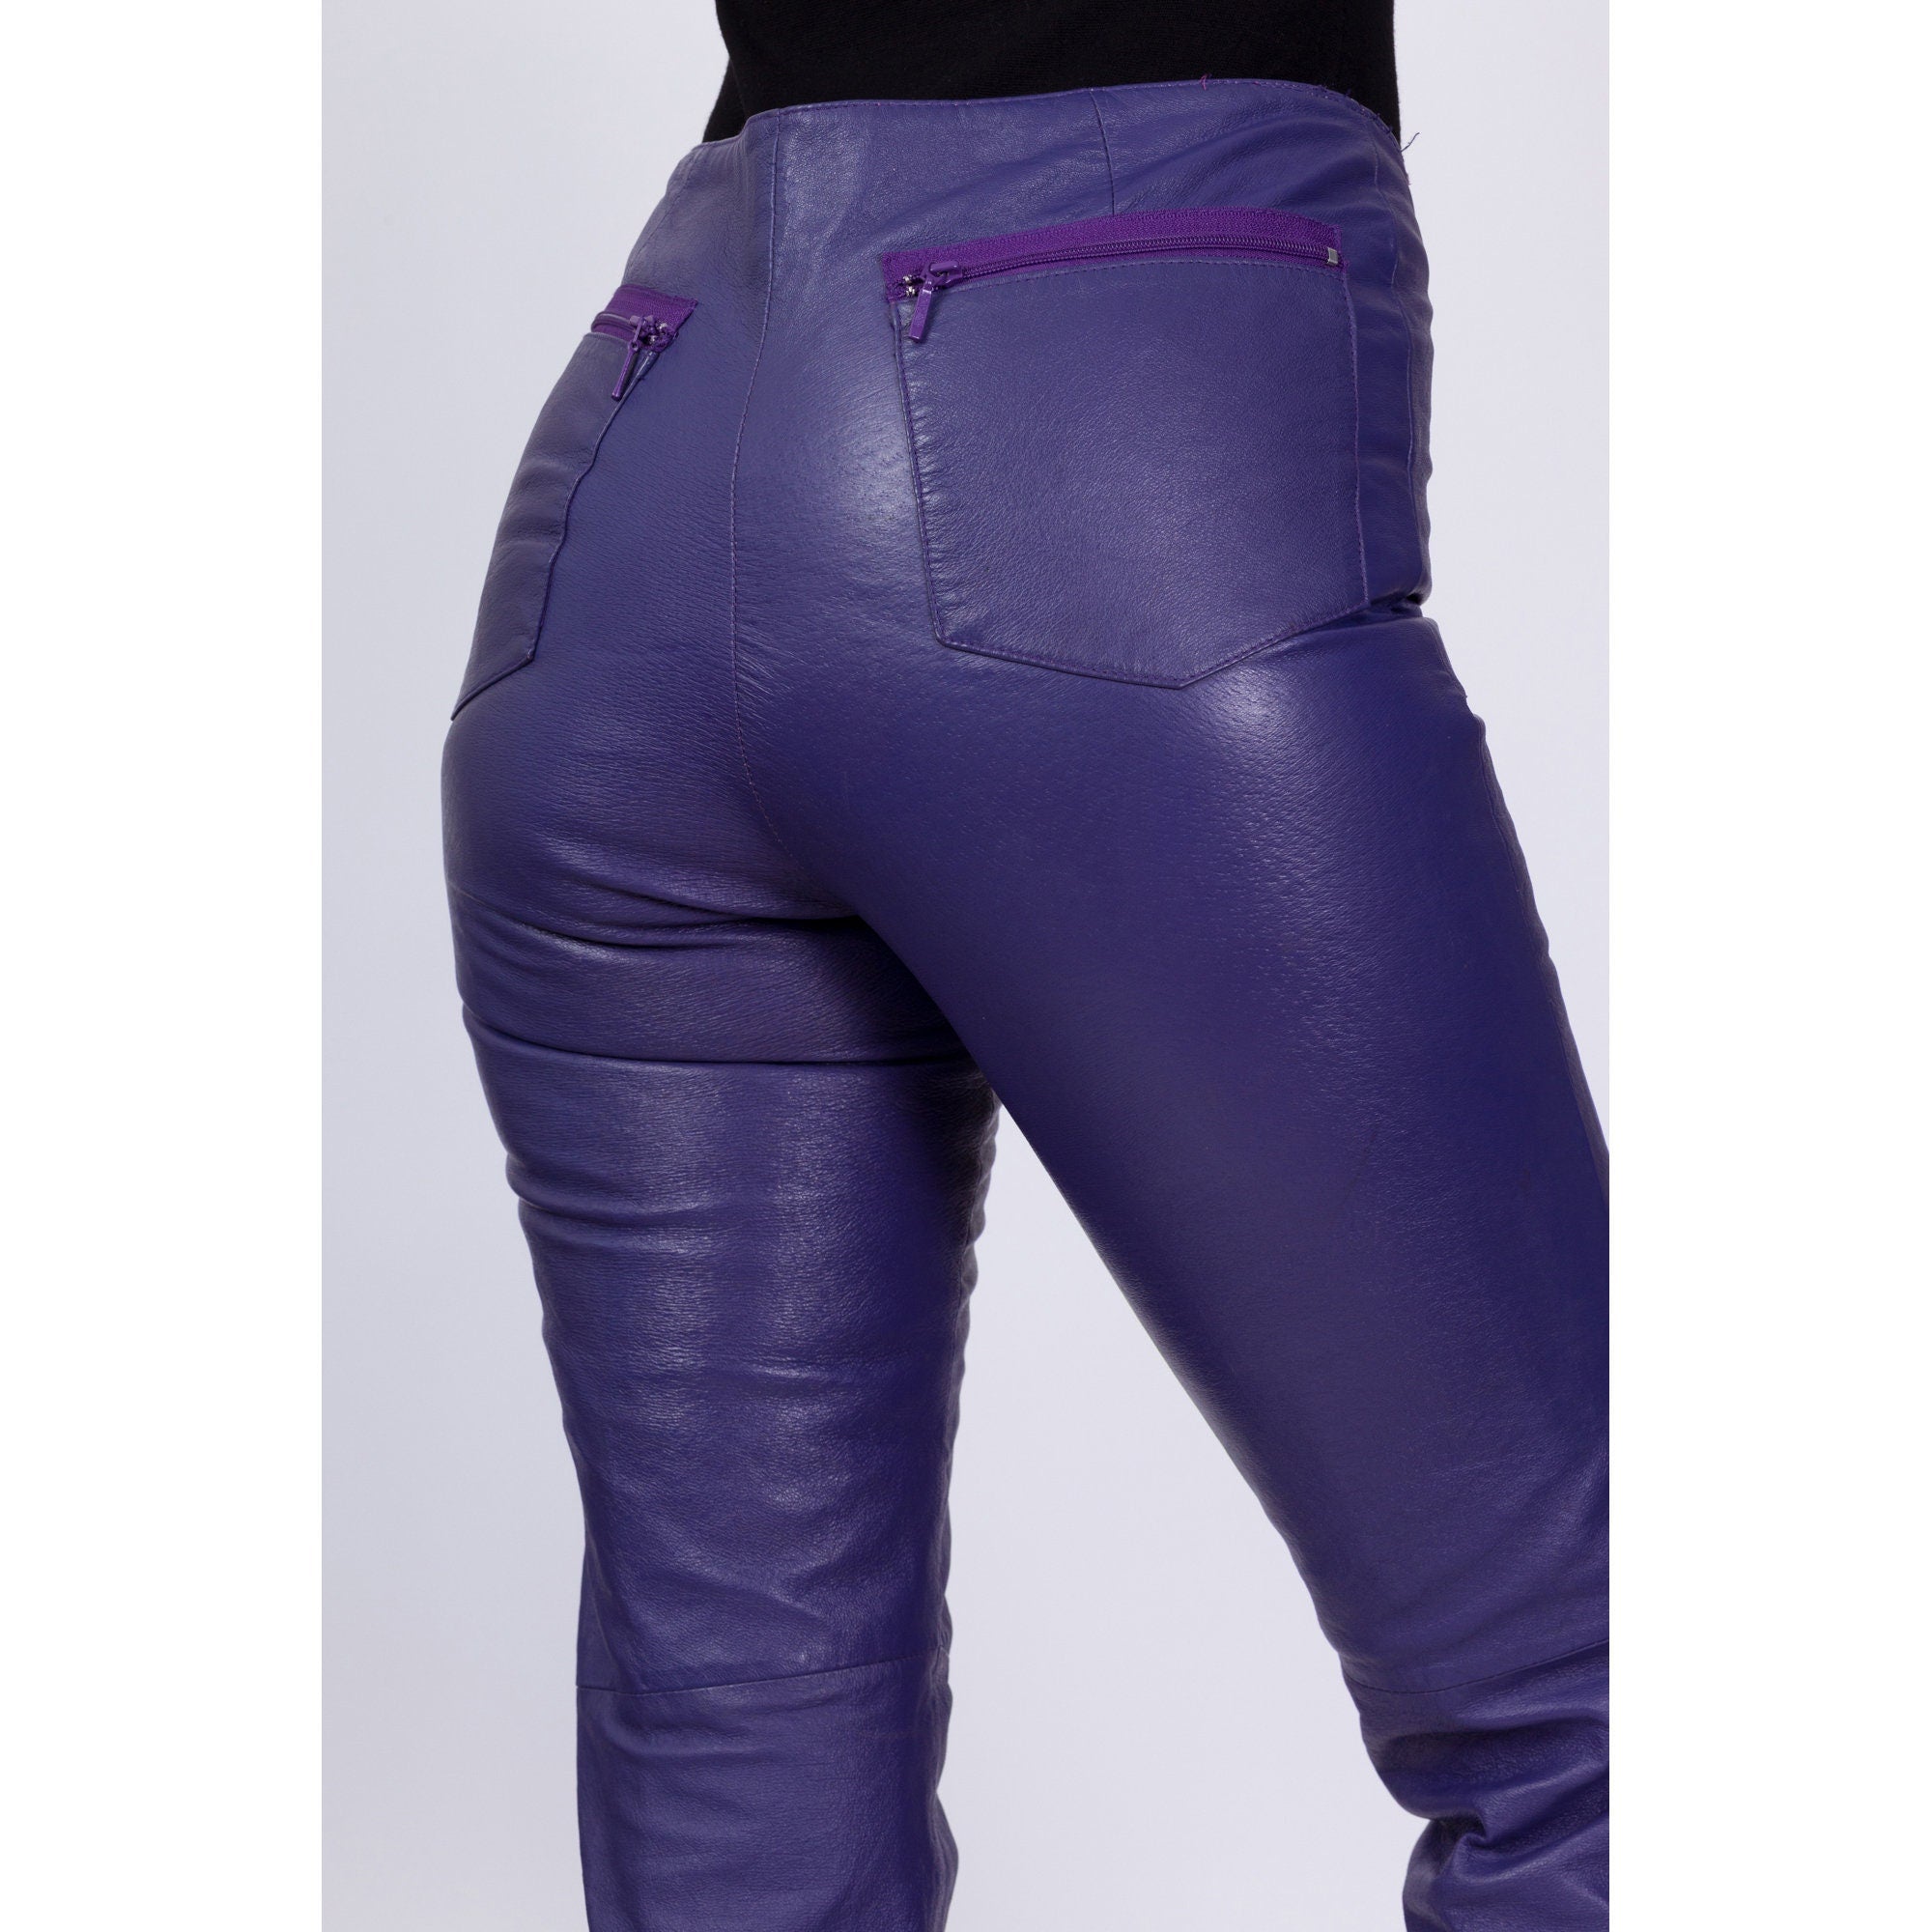 Awesome amethyst leather suit: Passionate in purple - Life in Leather